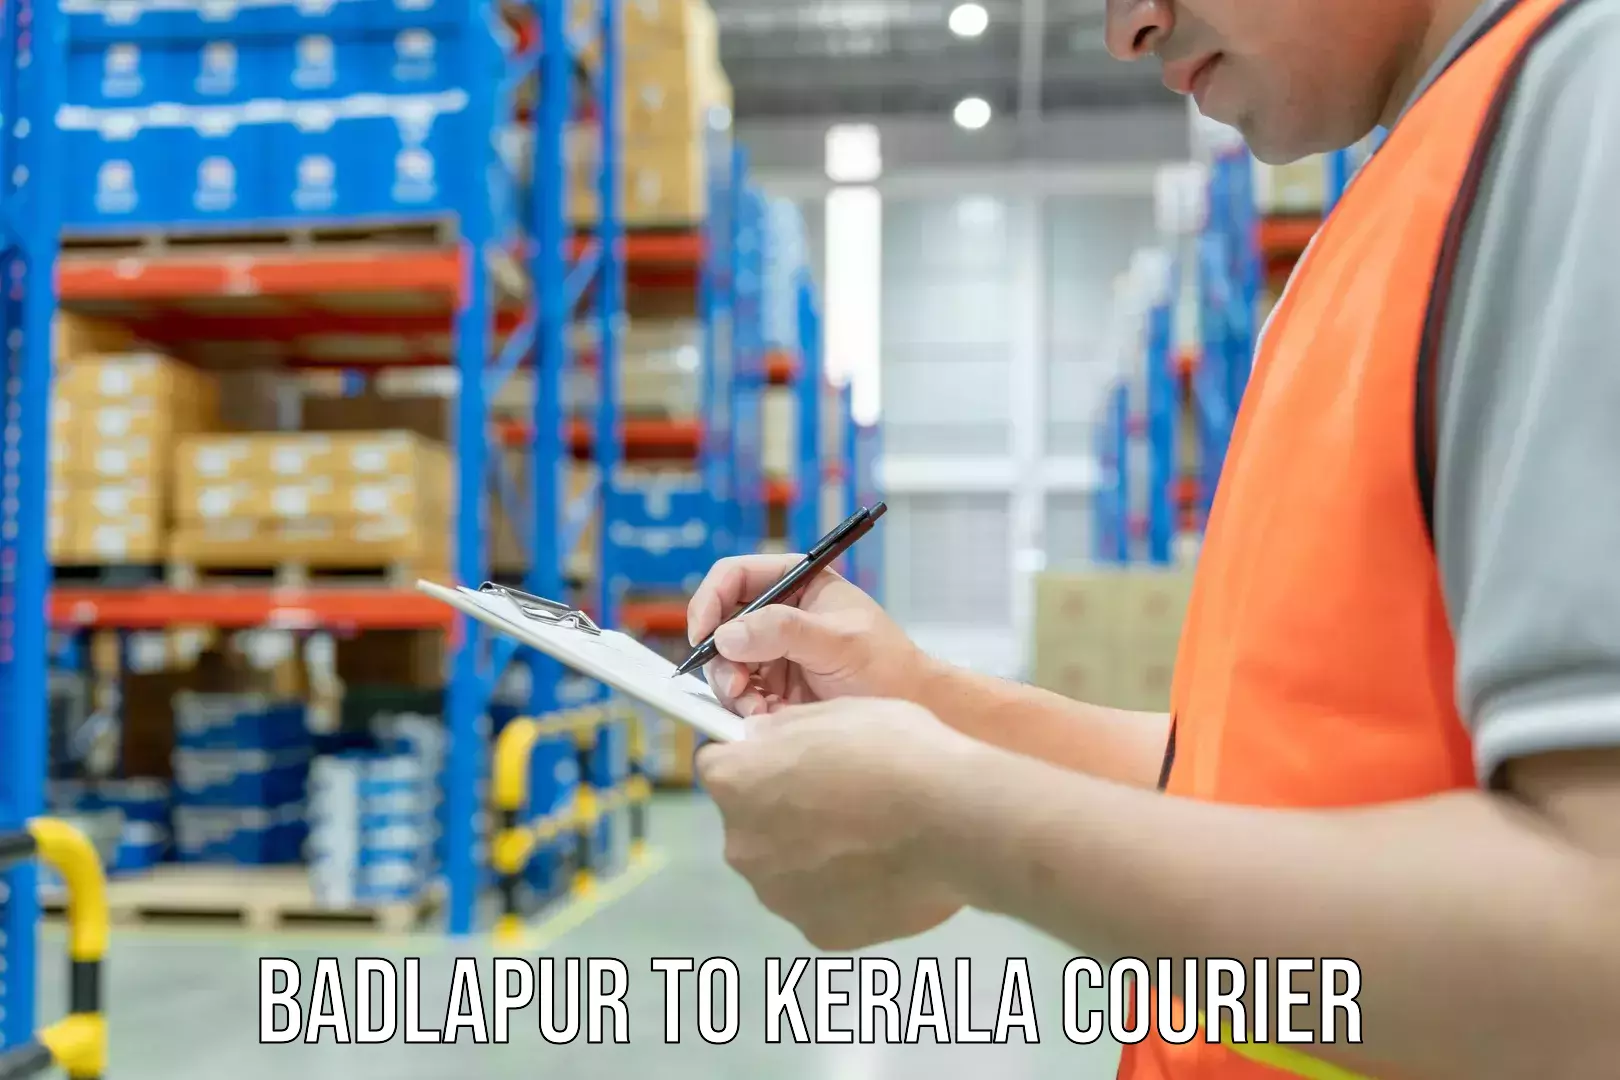 Sustainable shipping practices Badlapur to Kerala